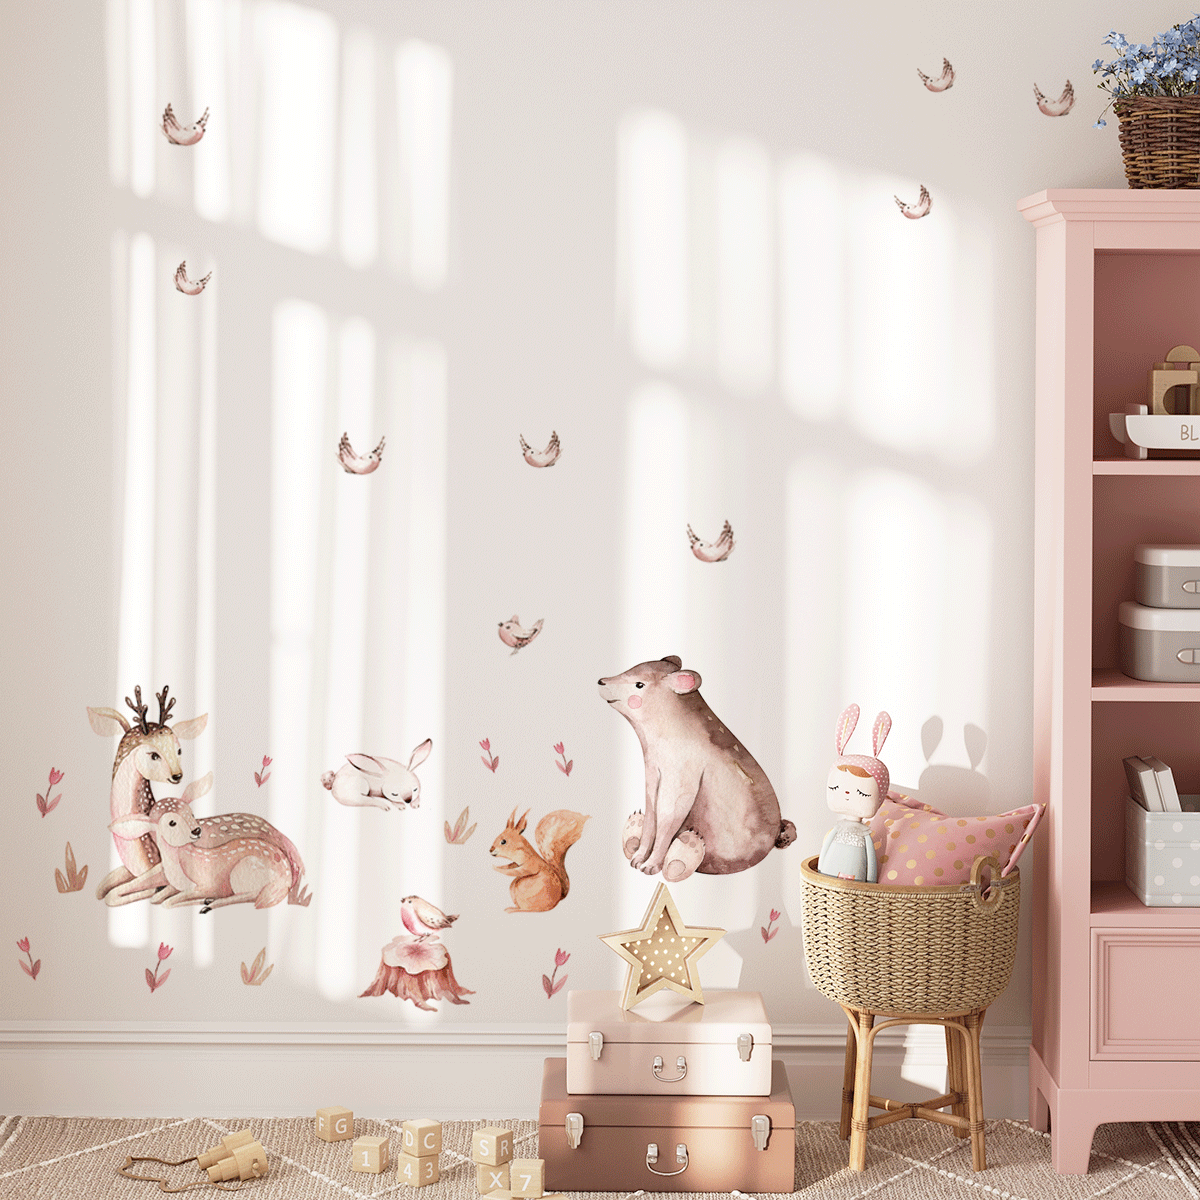 Woodland wall stickers - Watercolour forest friends